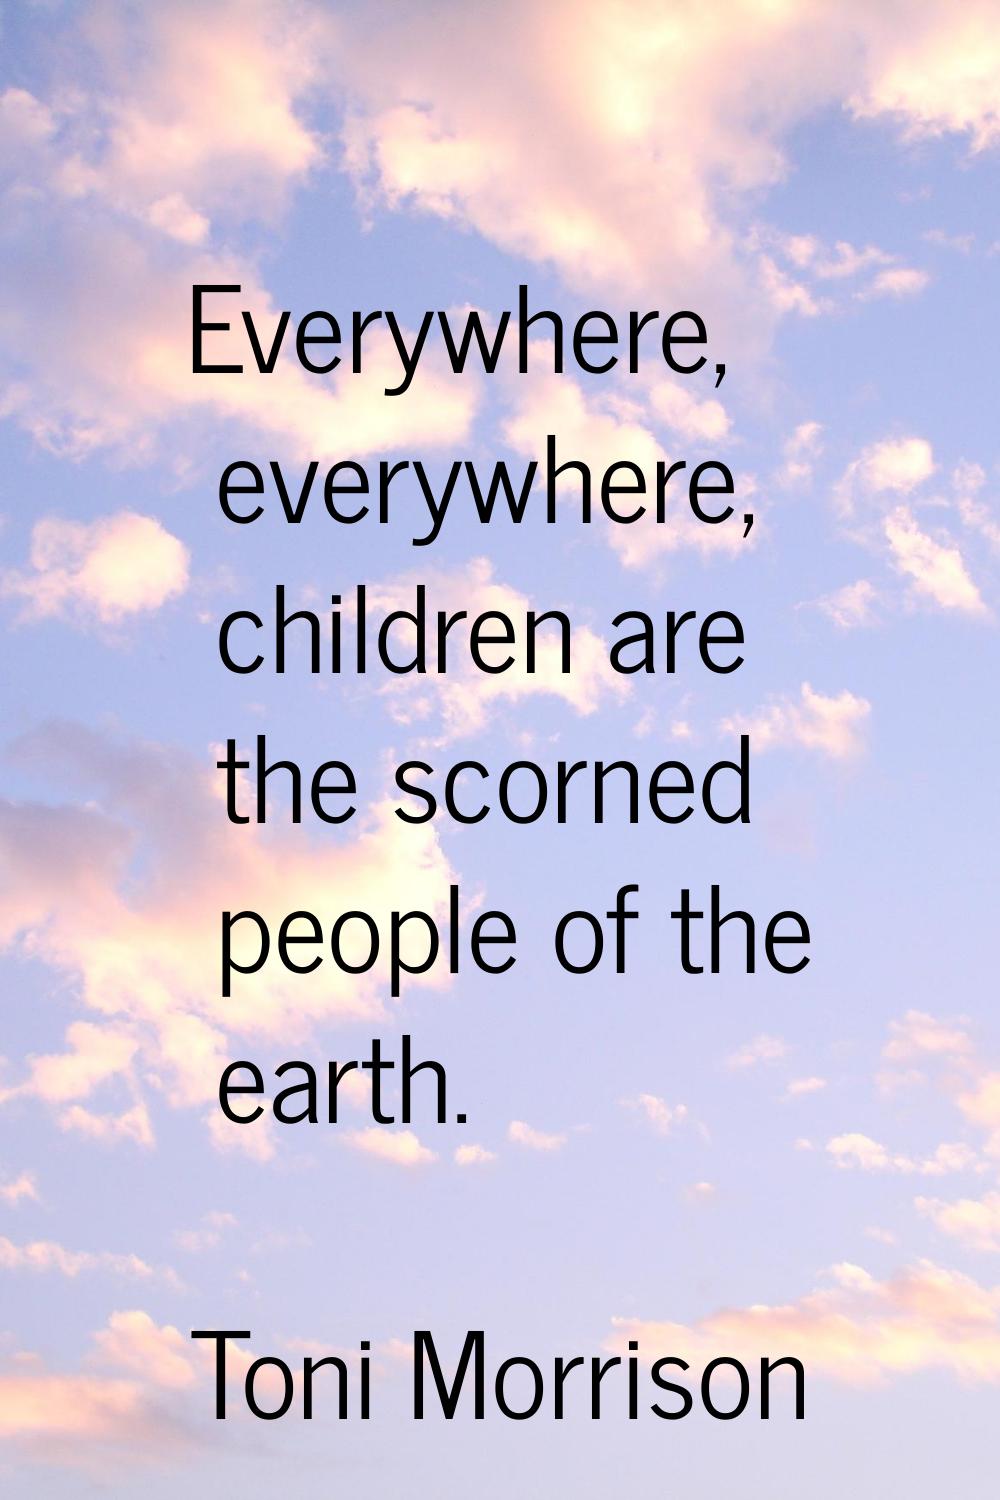 Everywhere, everywhere, children are the scorned people of the earth.